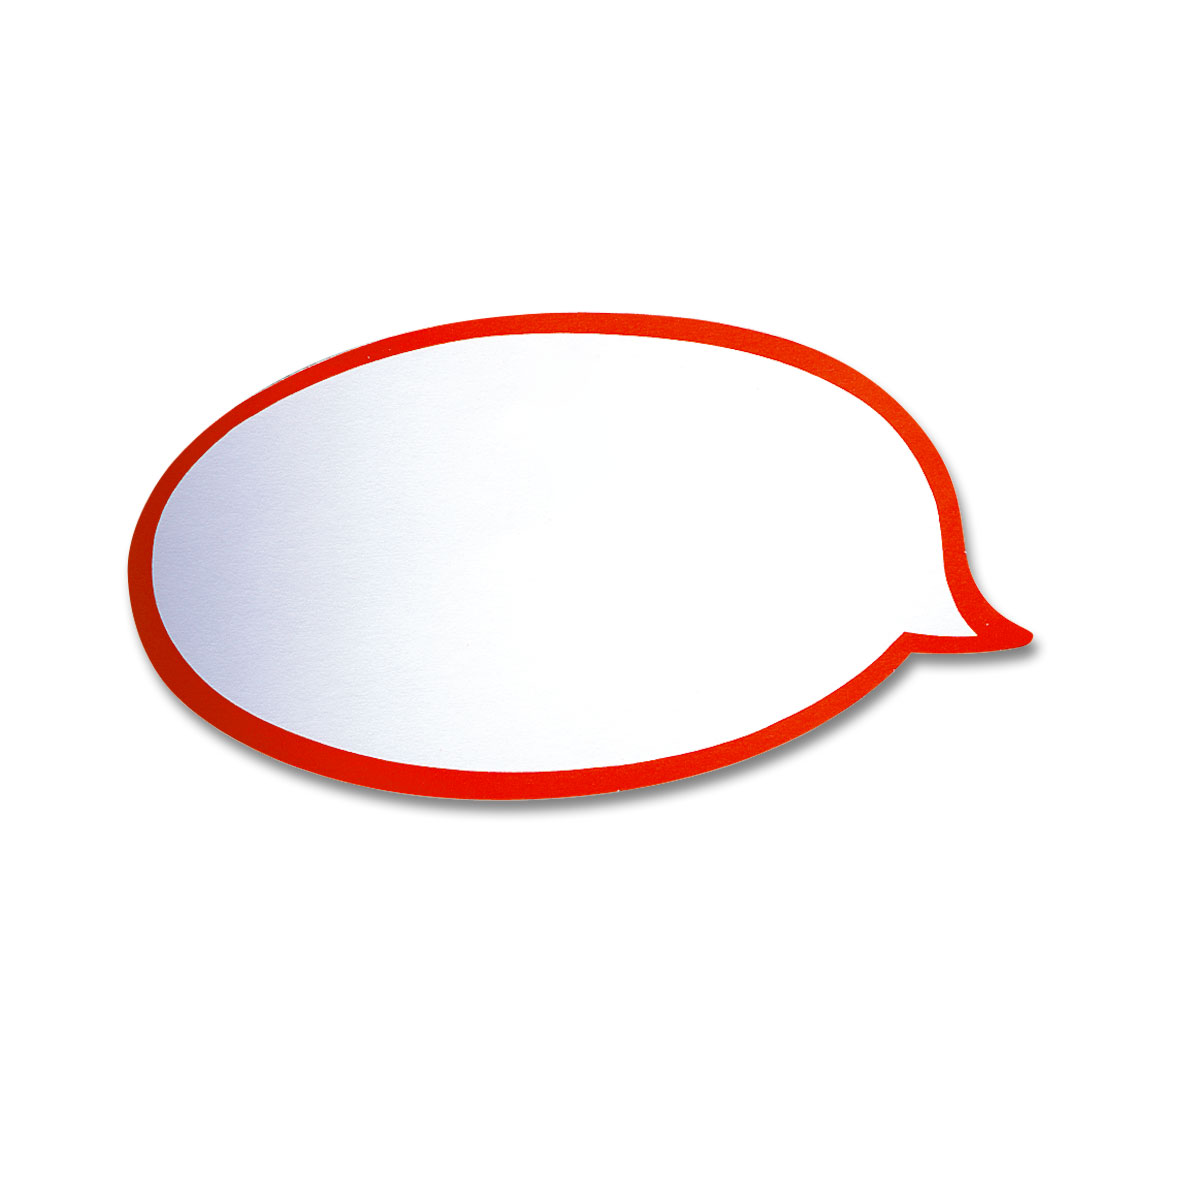 Speech Bubbles - Neuland: Products for active learning